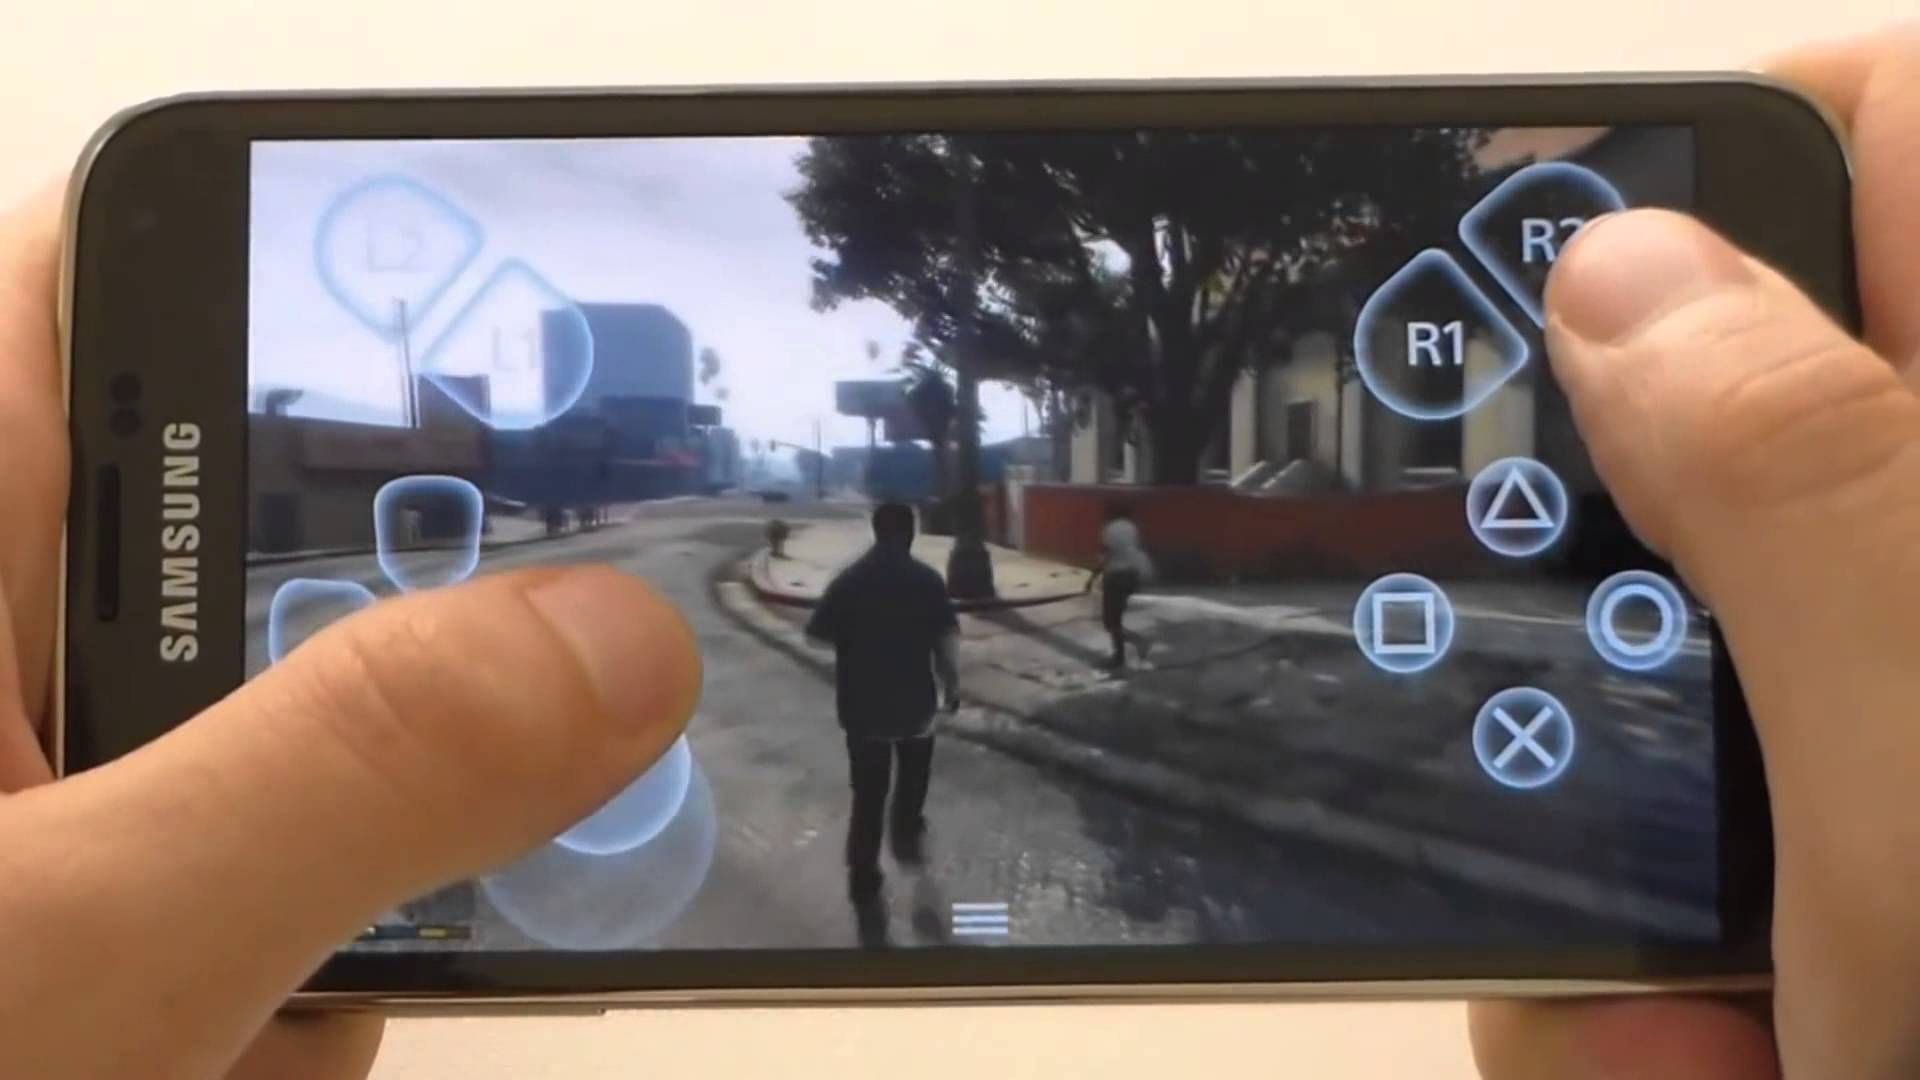 gta 5 obb file download for android